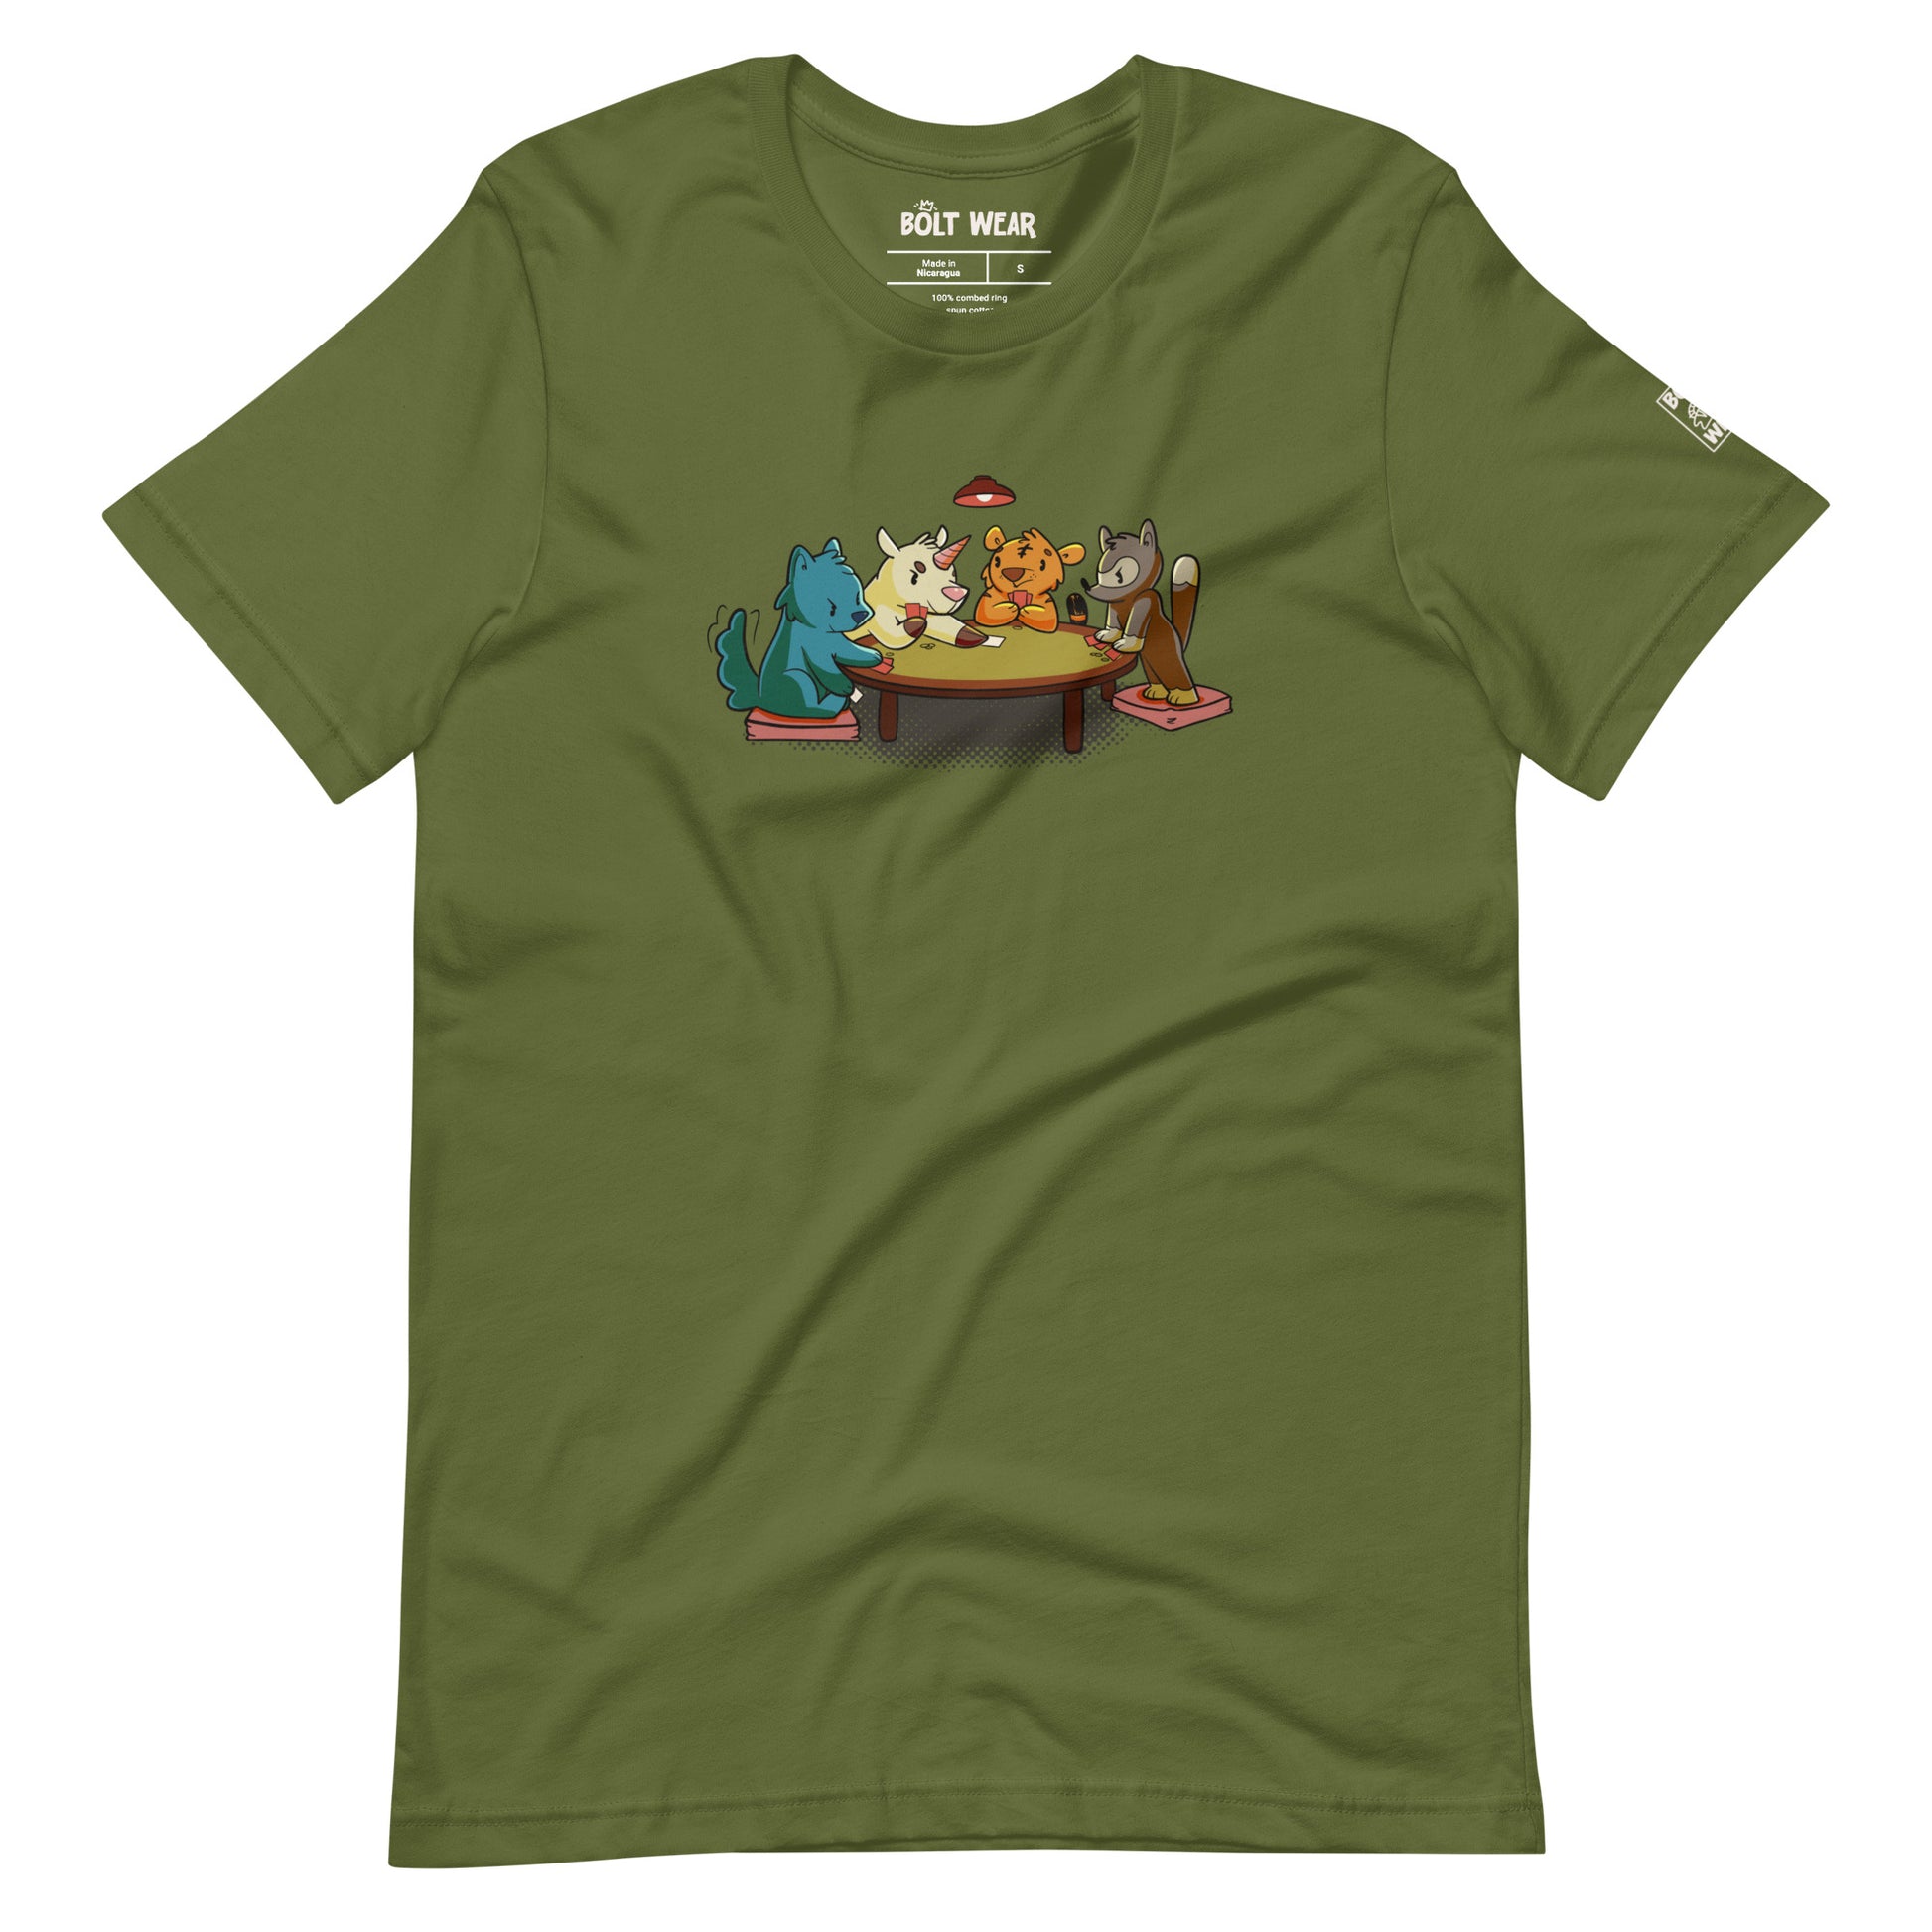 Dark Green t-shirt featuring 4 animals, a wolf, a unicorn, a tiger, and a racoon, playing cards around a table